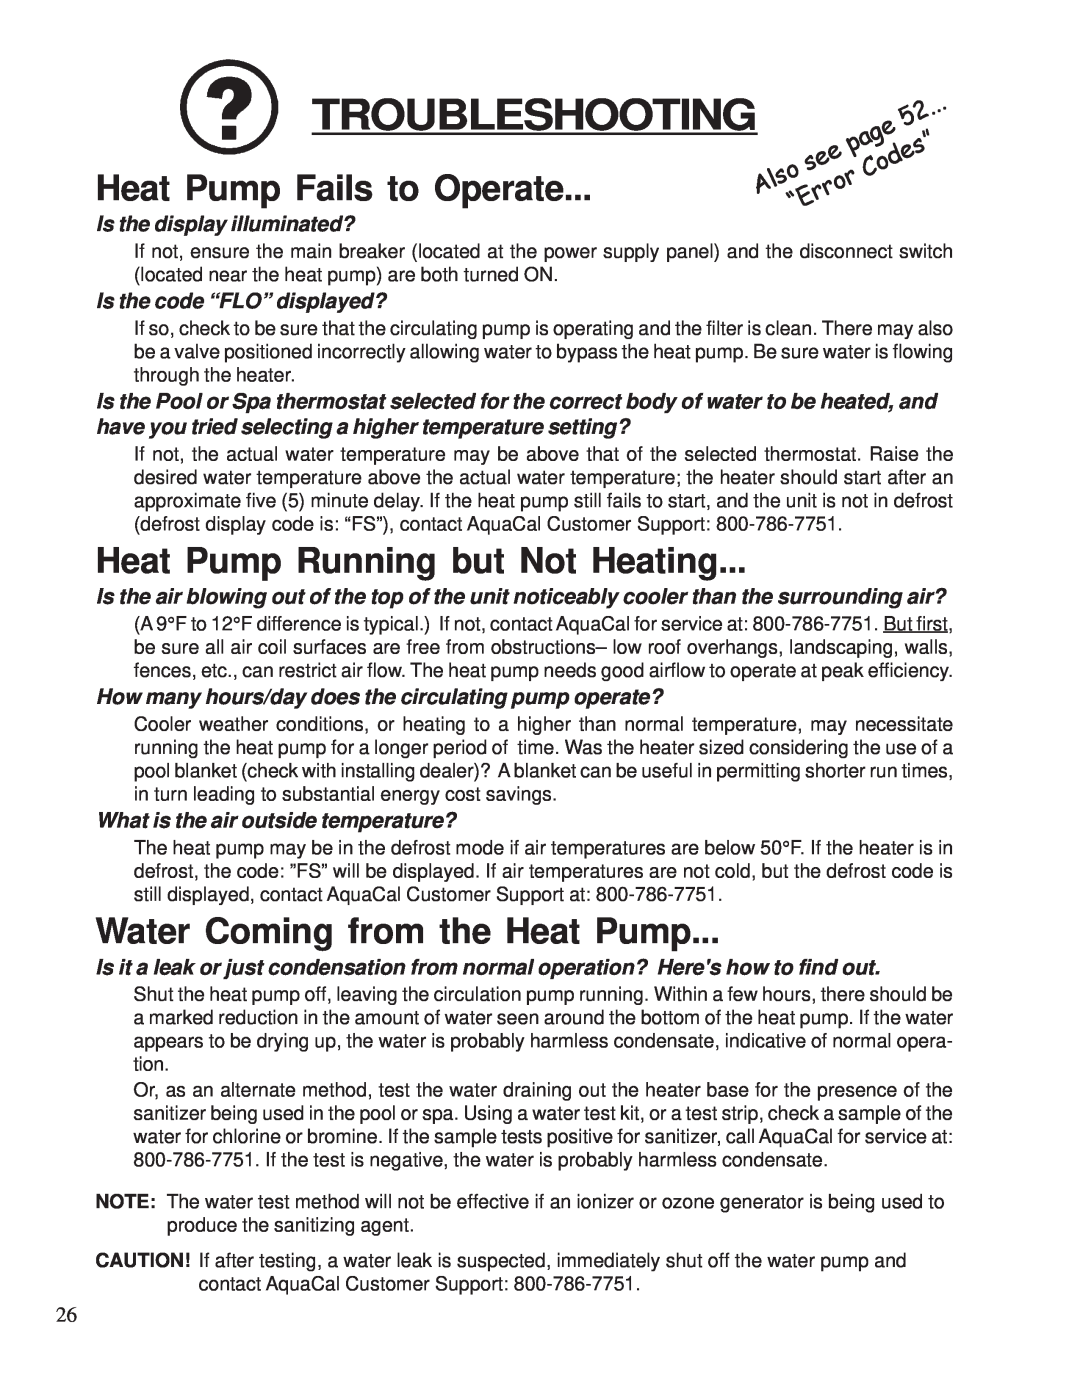 Aquacal 100 Troubleshooting, Heat Pump Fails to Operate, Heat Pump Running but Not Heating, page, see Codes”, Also, “Error 